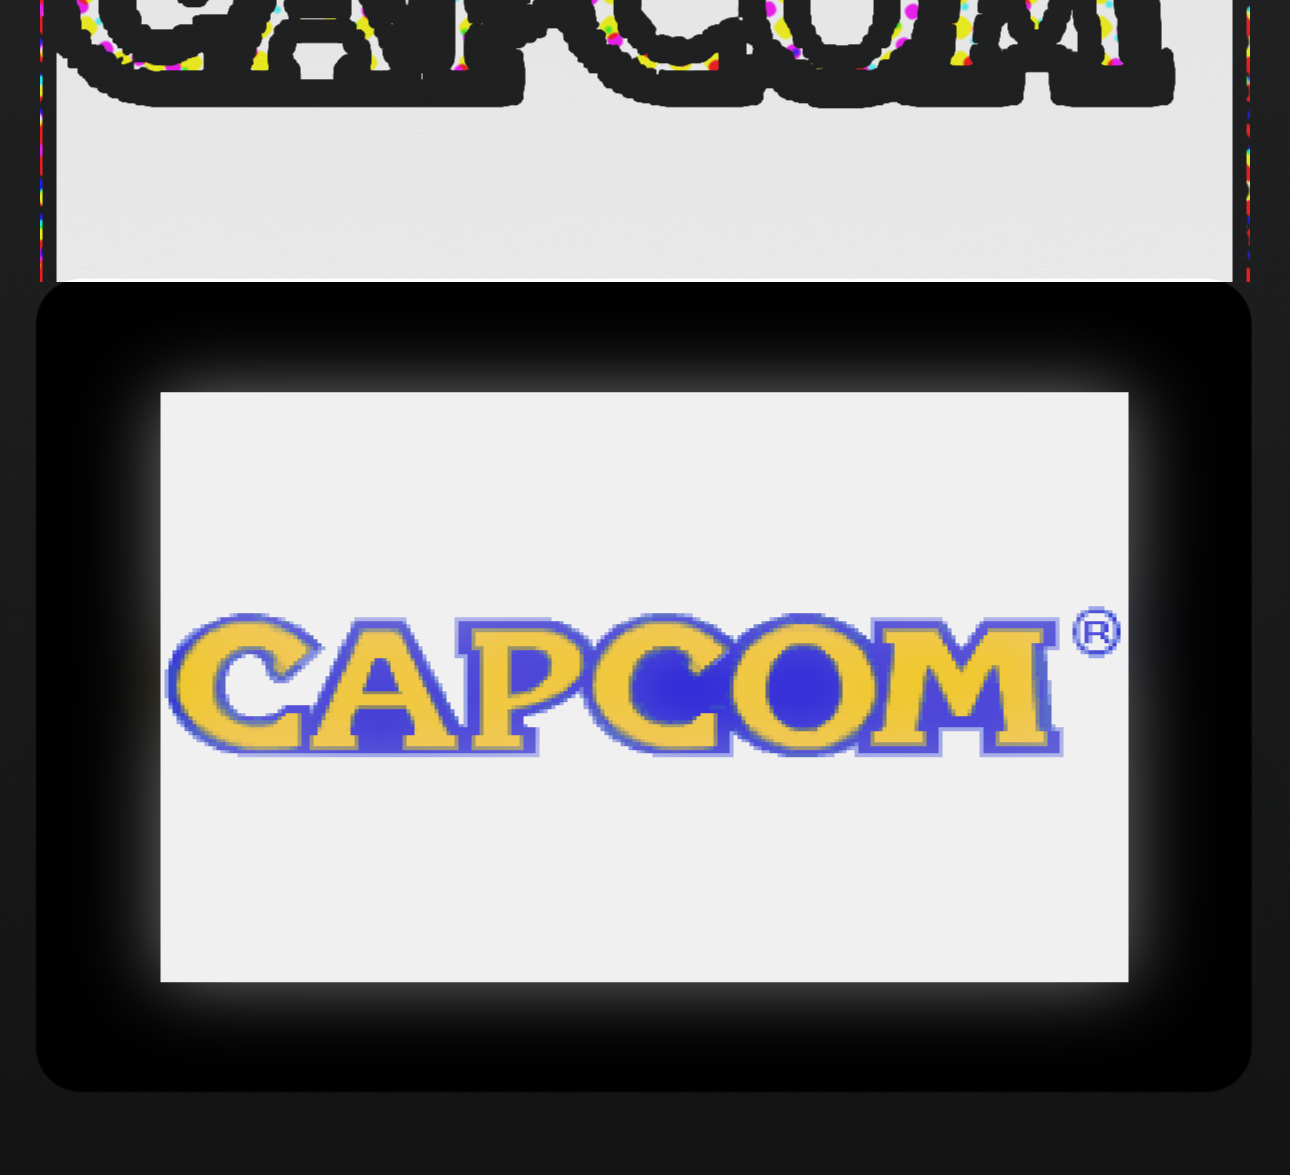 2 screens stacked inside a Delta emulator. Both showing the Capcom logo. Top is comic style so logo is outlined and shading is done using CMYK style dots. The bottom is diffused with a slight glow from the bloom. 